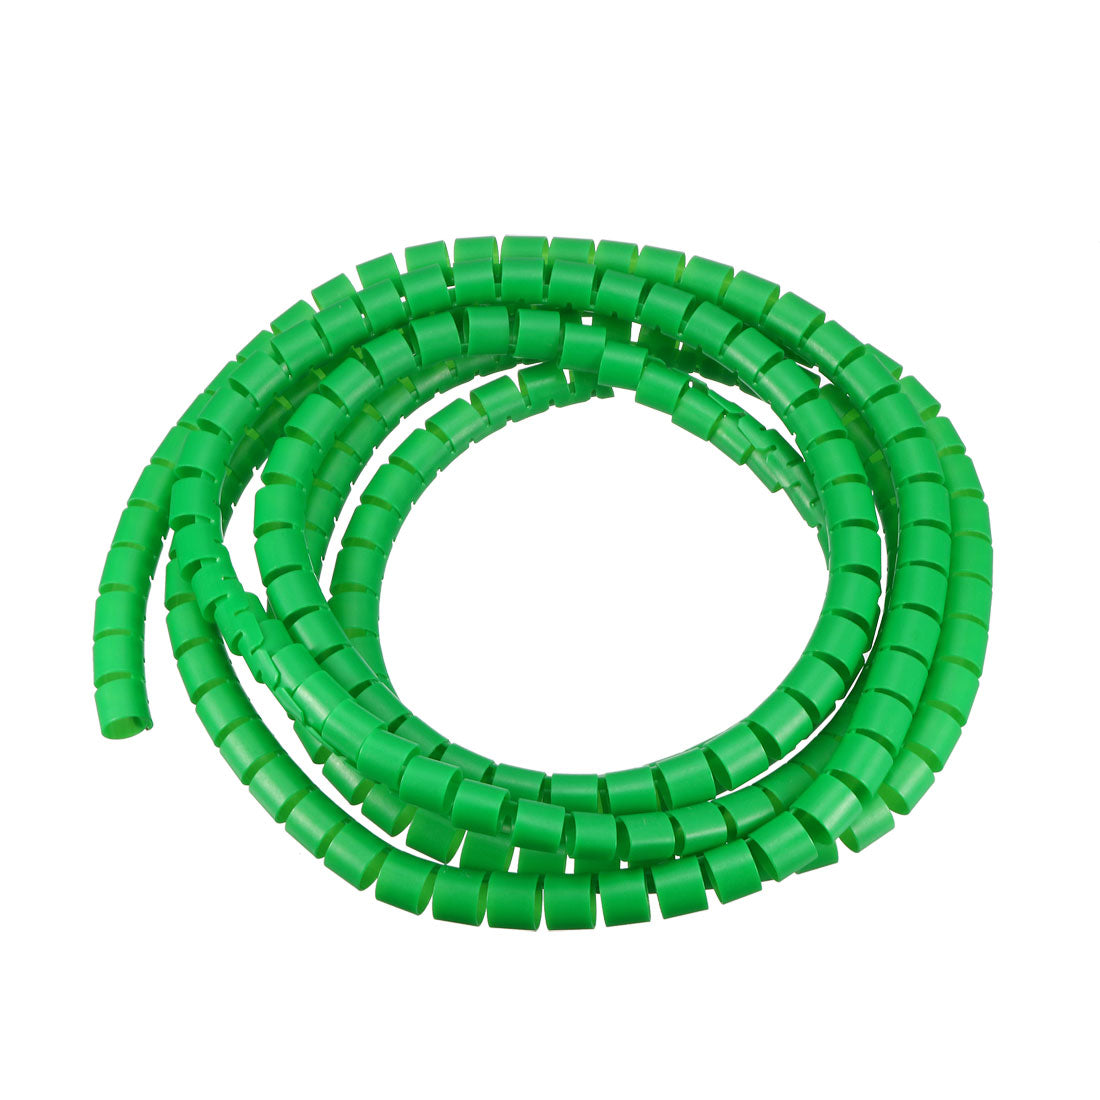 uxcell Uxcell Cable Management Sleeve Wire Wrap Cord Organizer 14mmx16mm 3 Meters Length Green